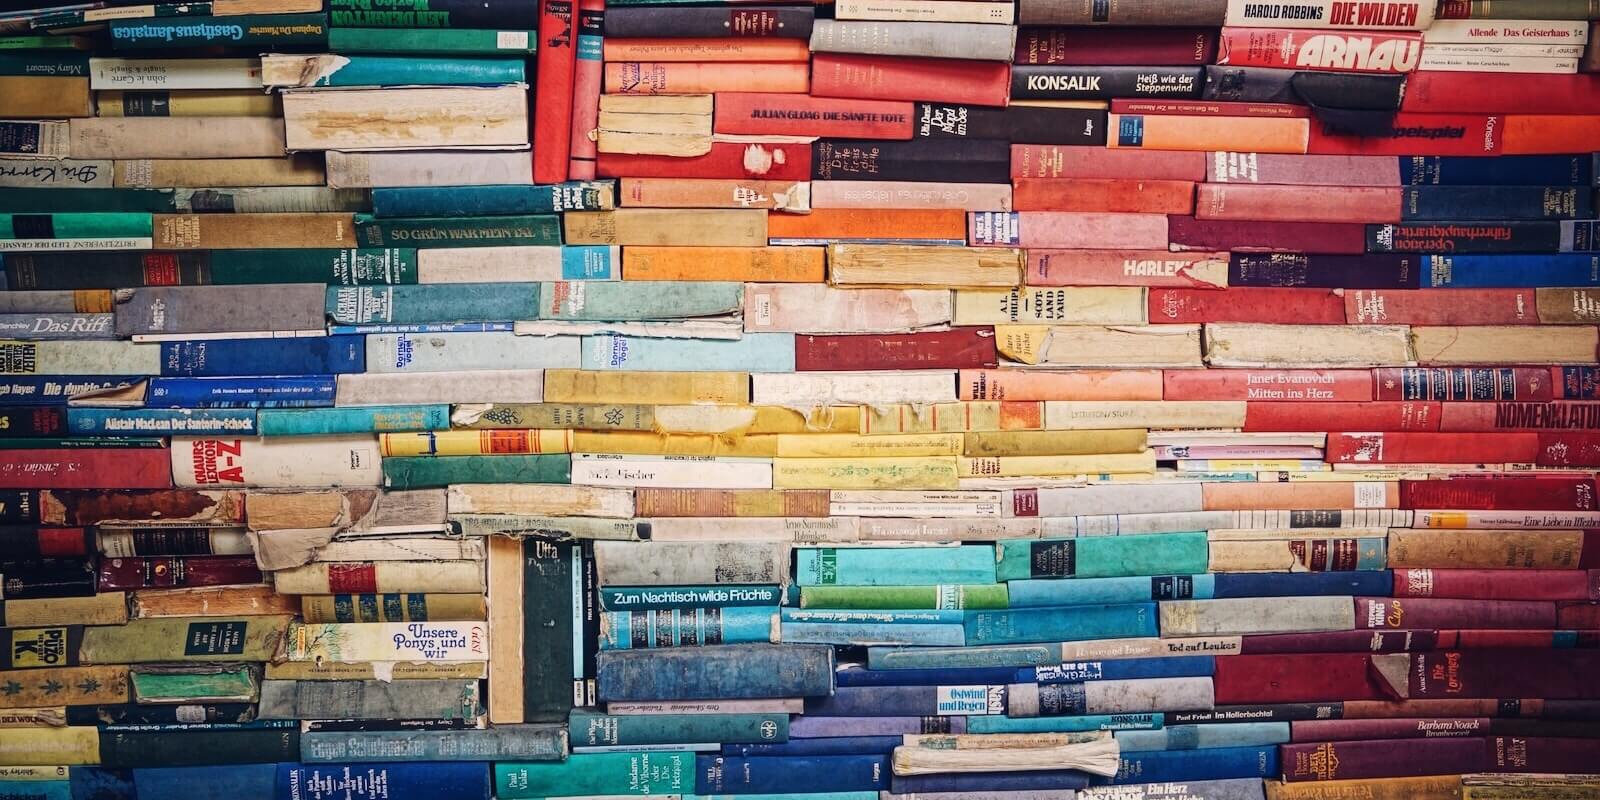 19 Powerful Techniques to Build a Reading Habit - Nick Wignall